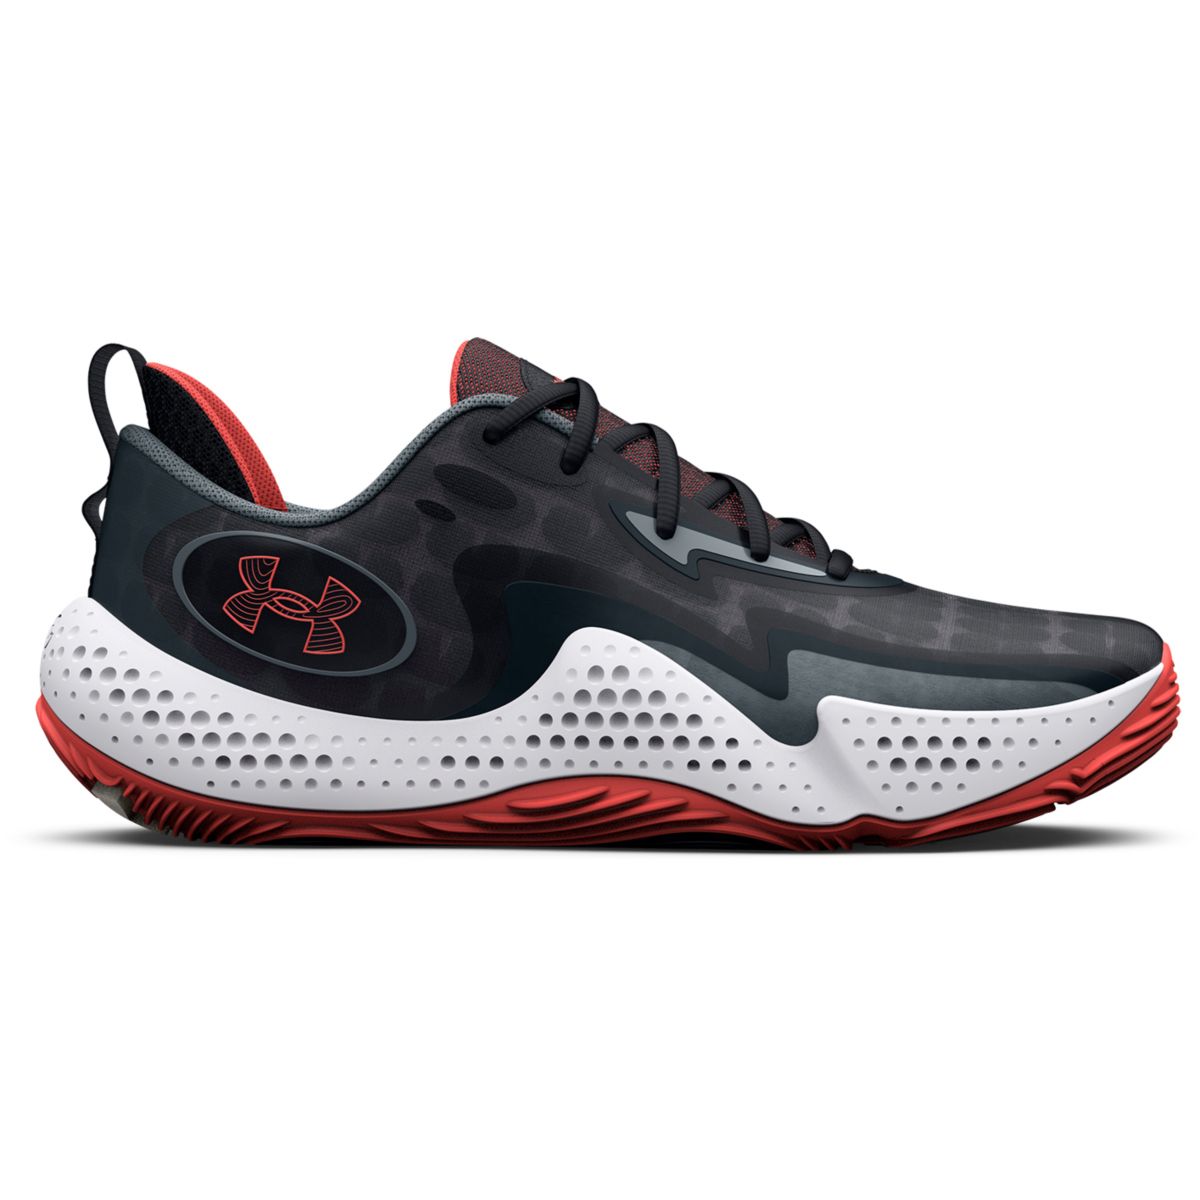 Under Armour Spawn 5 Men's Basketball Shoes 3026285-001